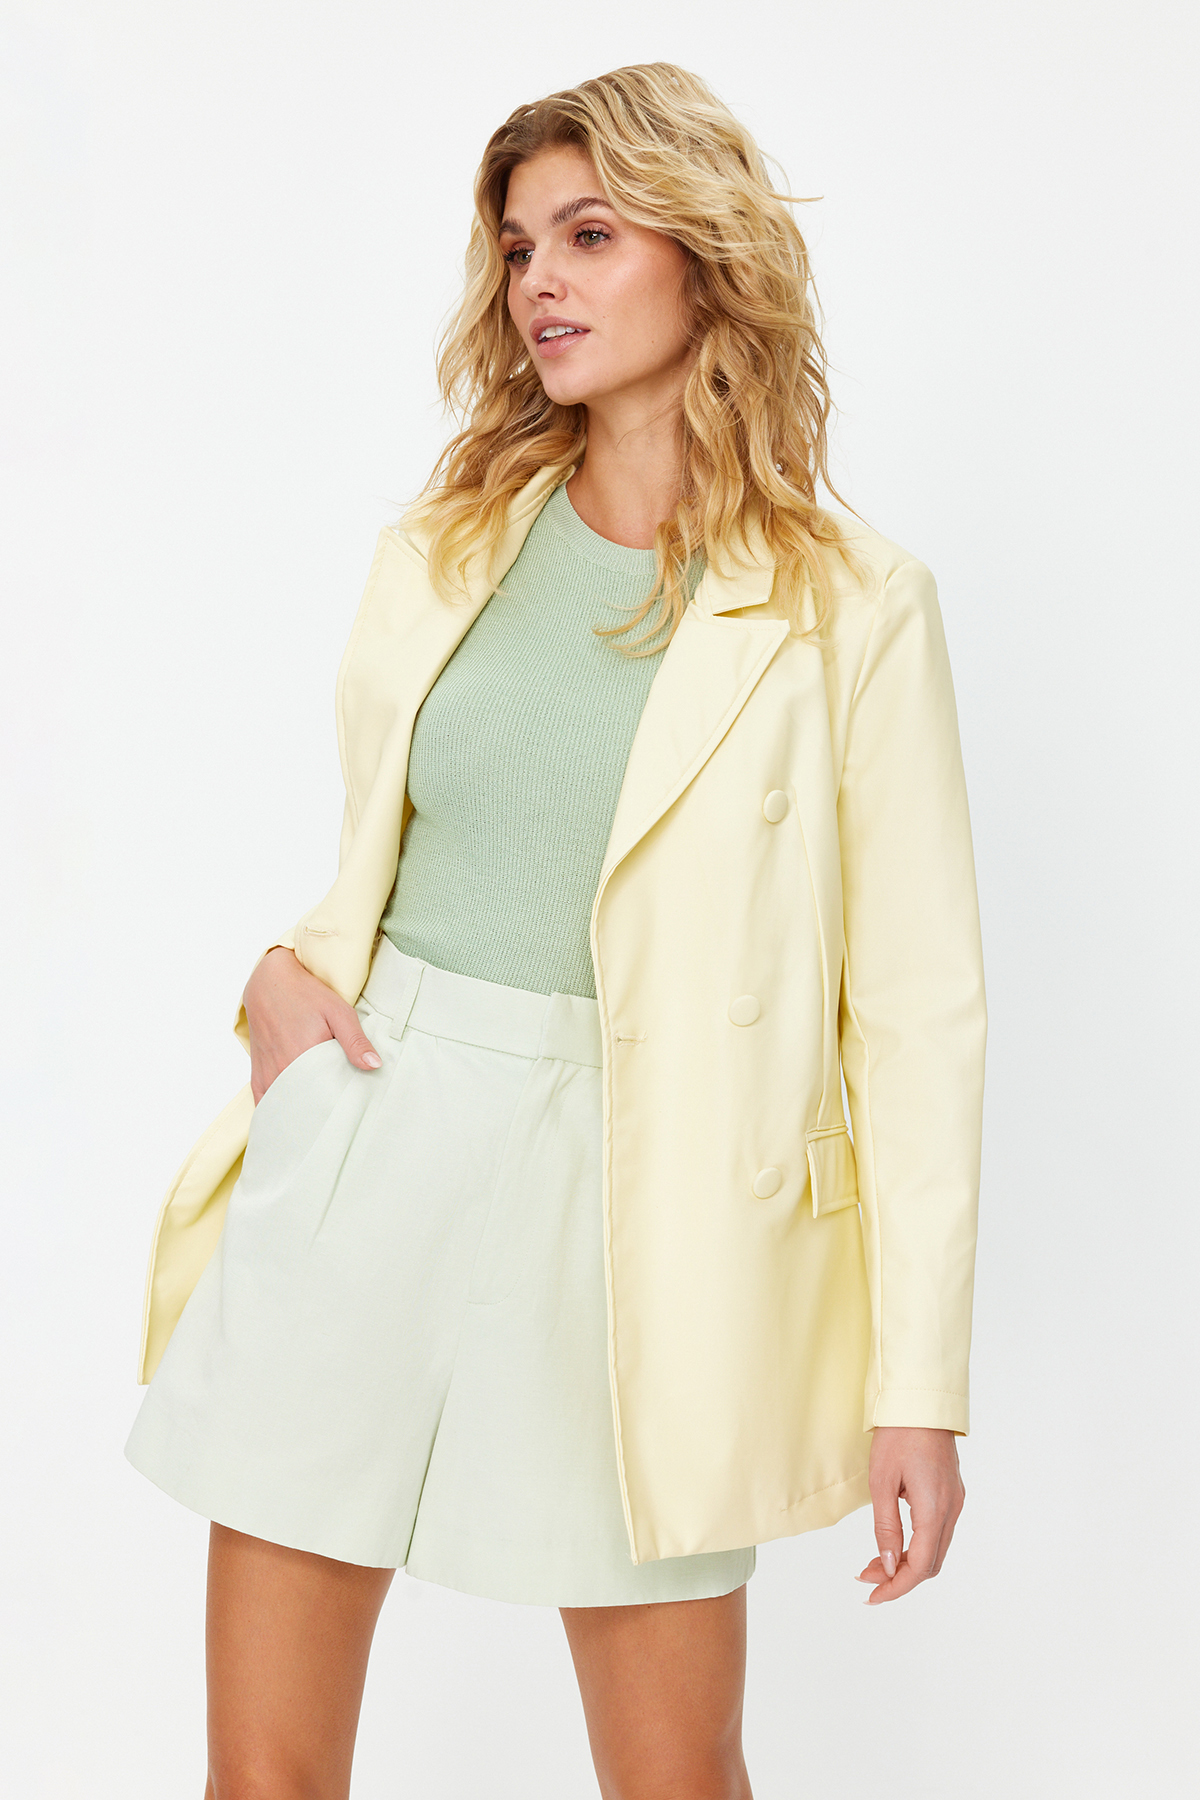 Trendyol Light Yellow Double Breasted Closure Woven Lined Faux Leather Blazer Jacket